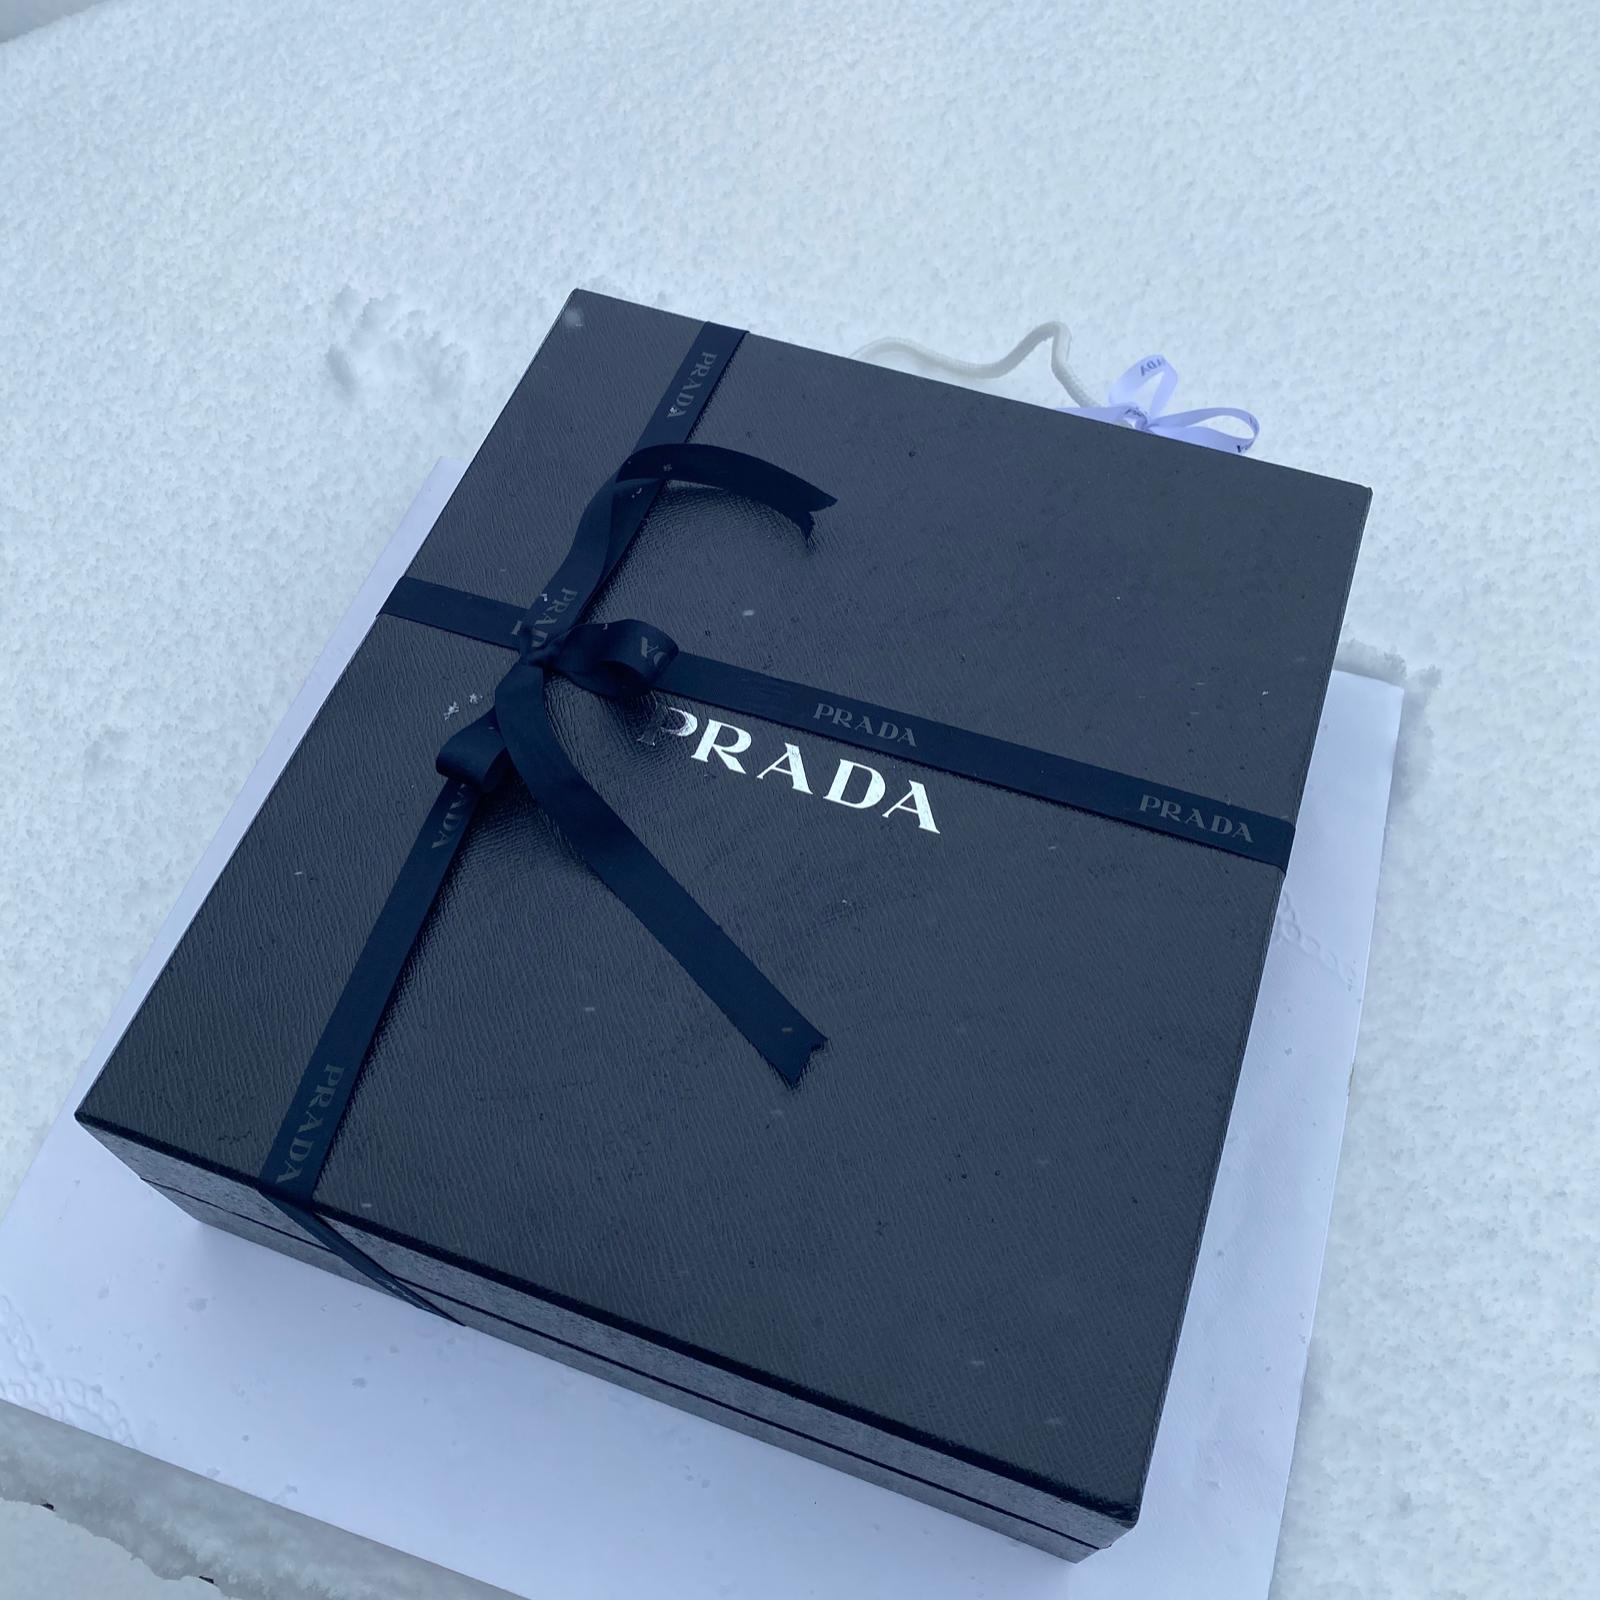 PRADA RE EDITION 2005 BAG REVIEW, ONE MONTH LATER